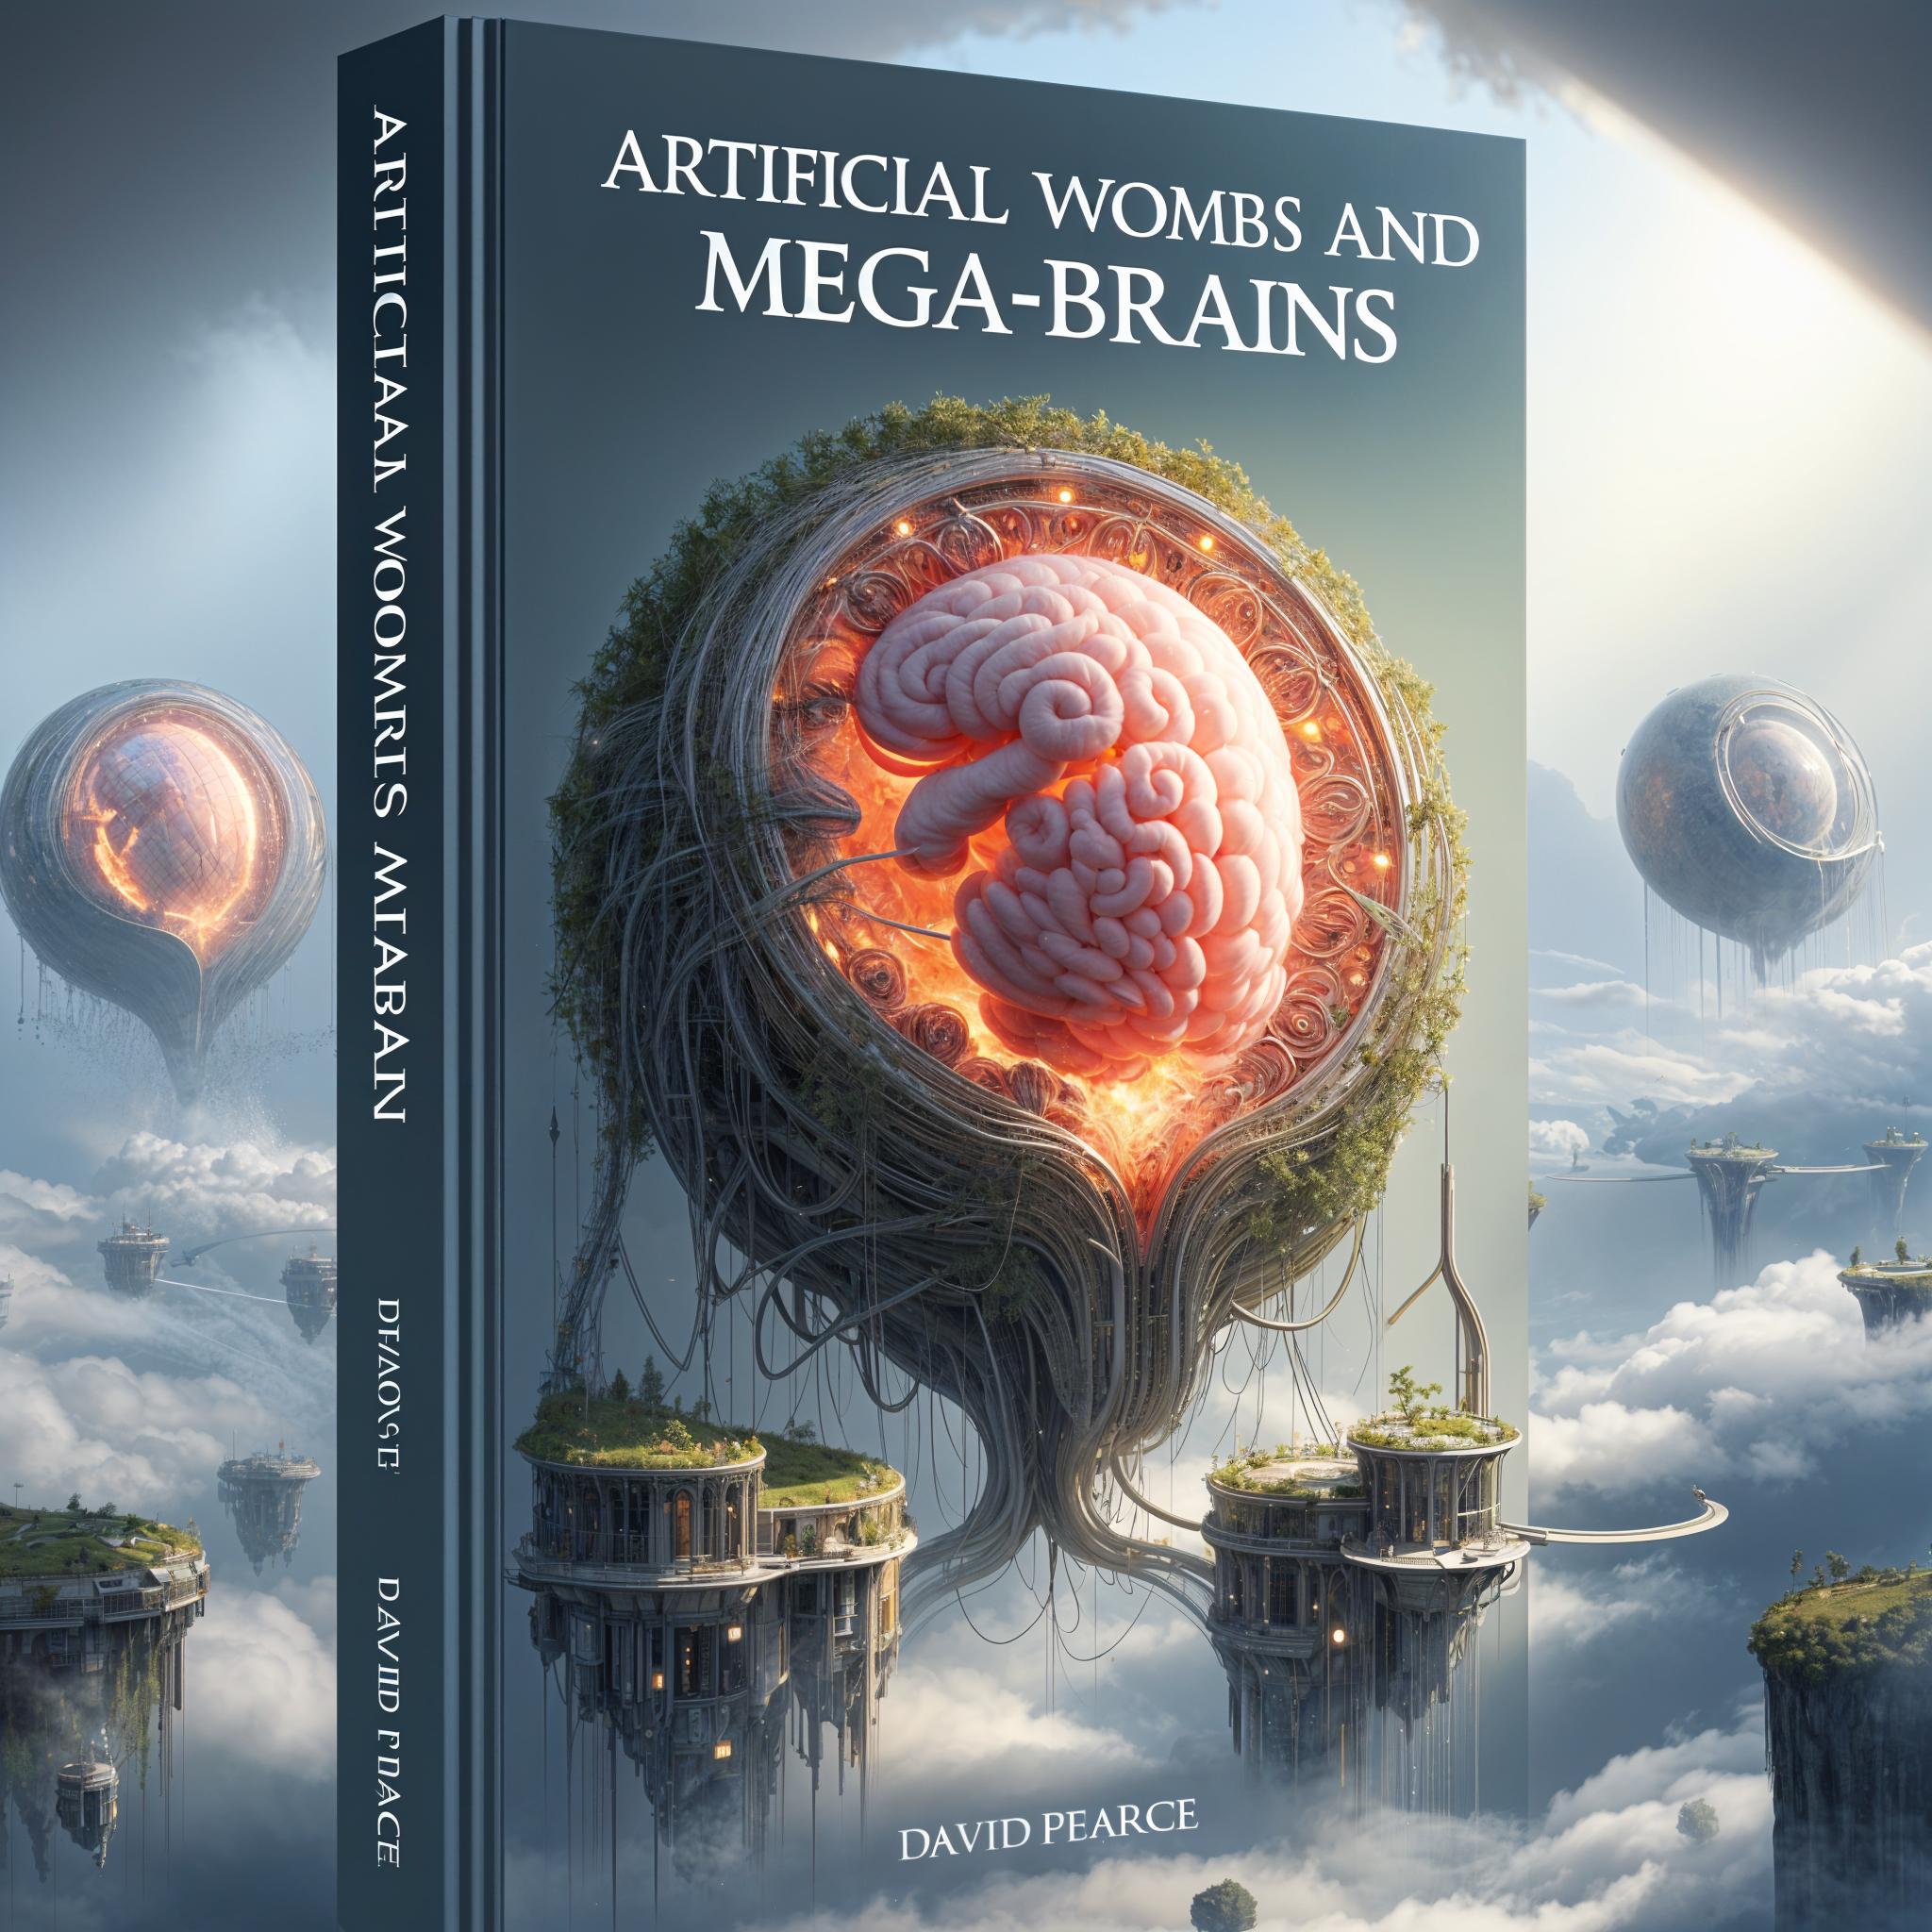 Artificial Wombs and Mega-Brains by David Pearce